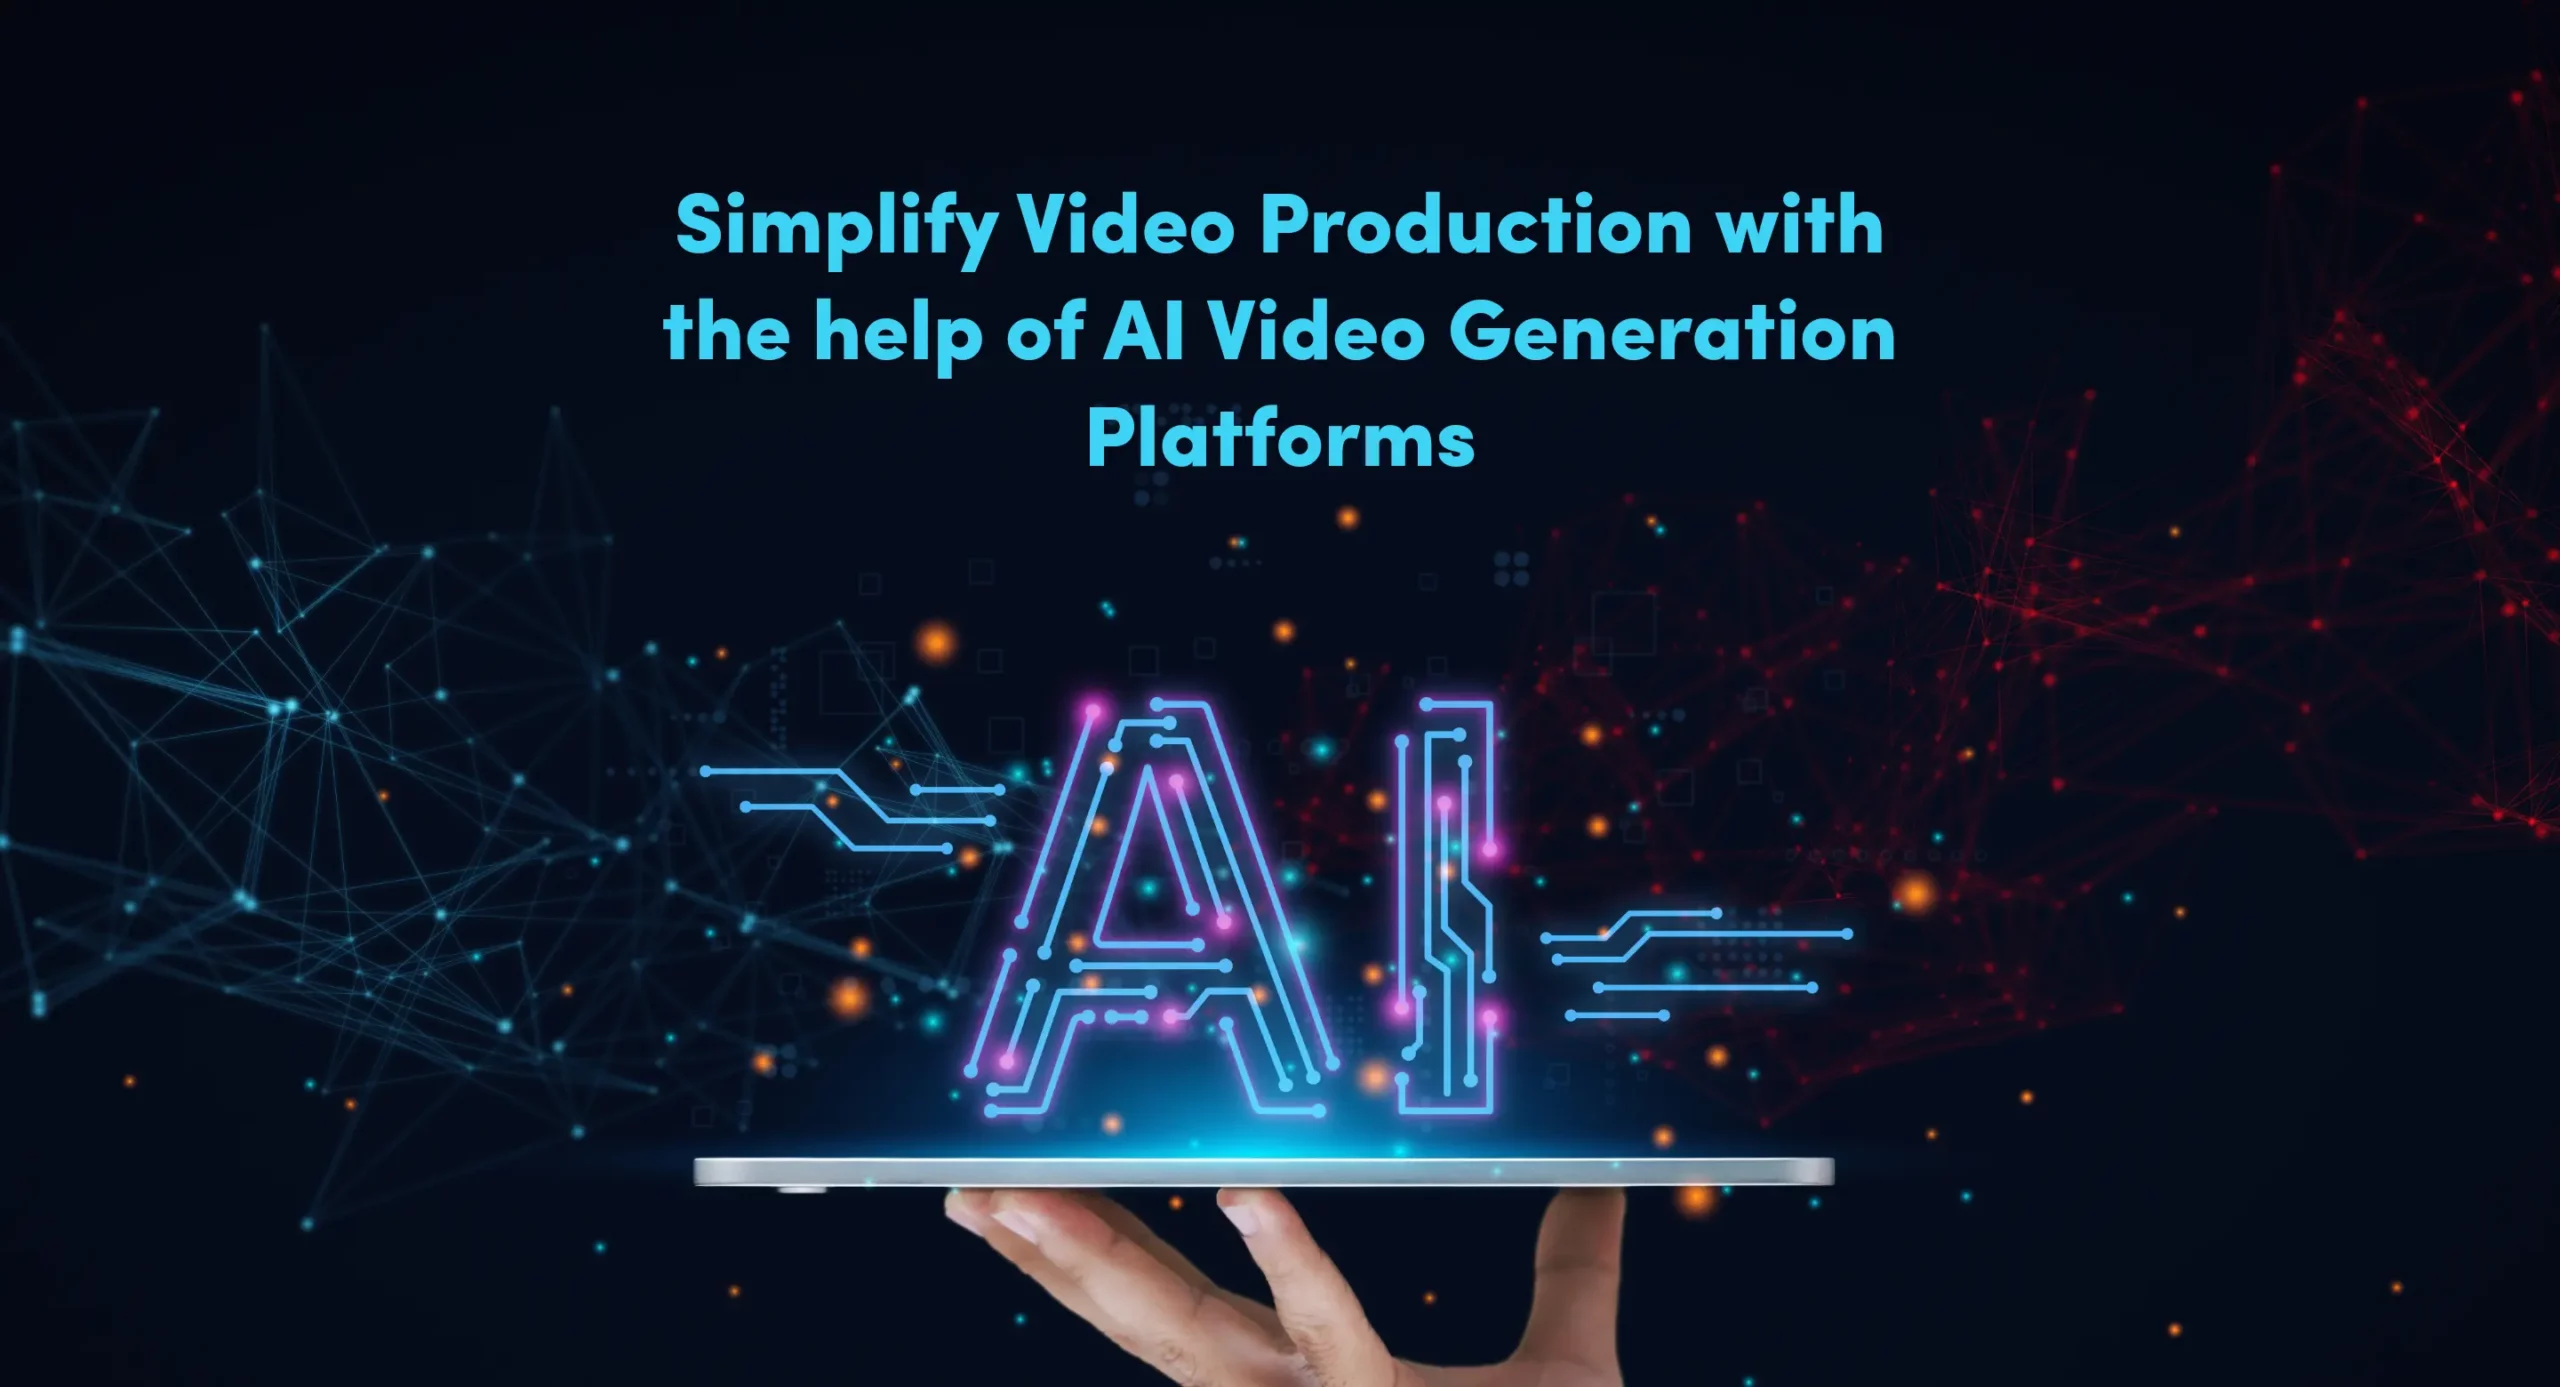 Simplify Video Production with the help of AI Video Generation Platforms